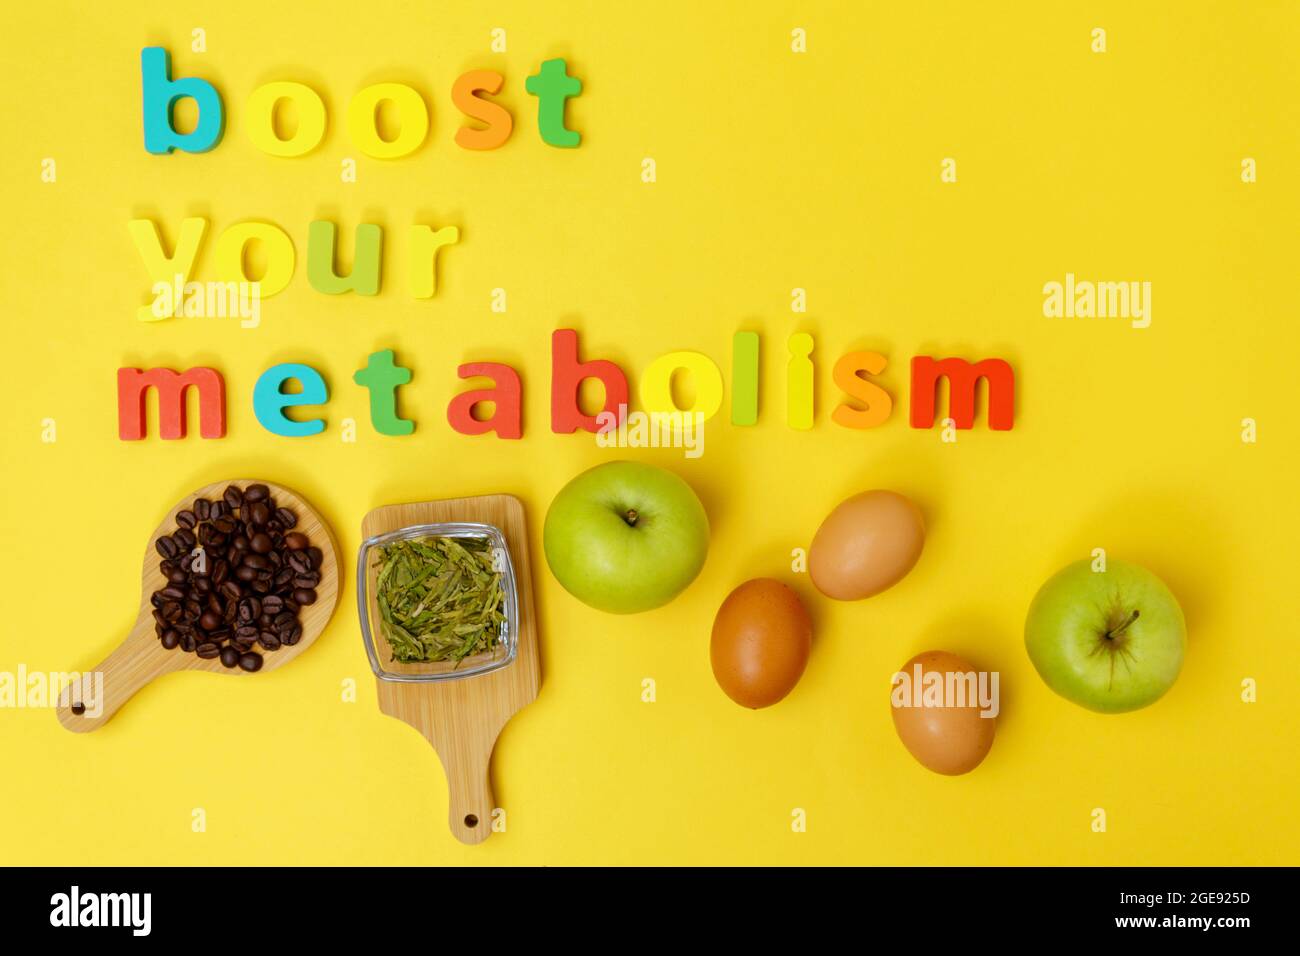 Boost your metabolism eggs, coffee, green tea, apple on a yellow background  top view Stock Photo - Alamy